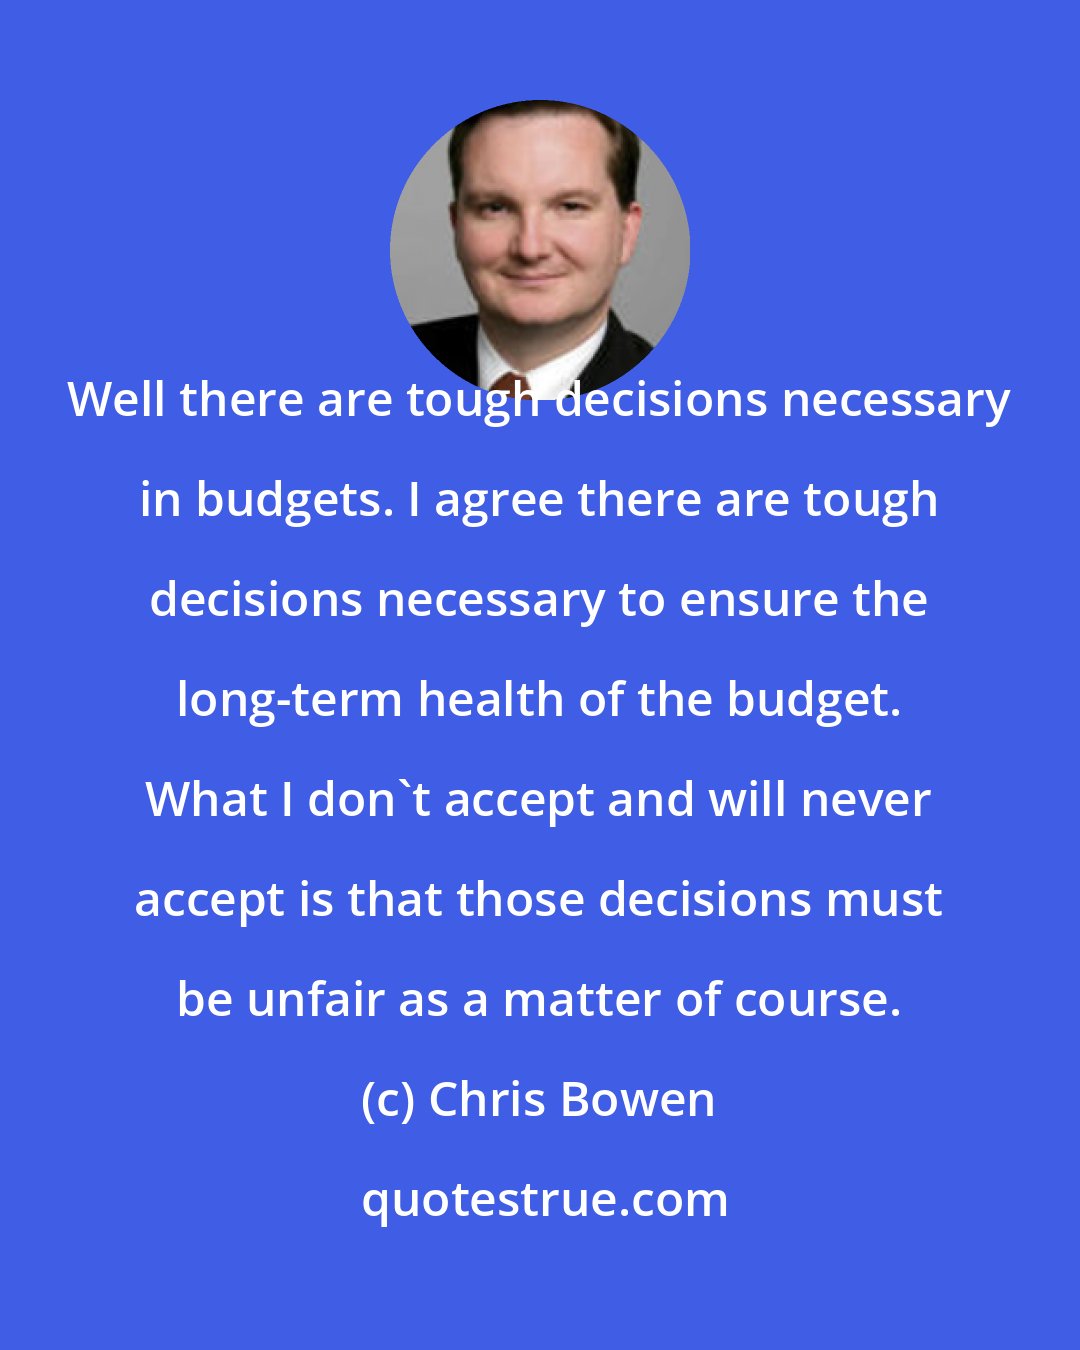 Chris Bowen: Well there are tough decisions necessary in budgets. I agree there are tough decisions necessary to ensure the long-term health of the budget. What I don't accept and will never accept is that those decisions must be unfair as a matter of course.